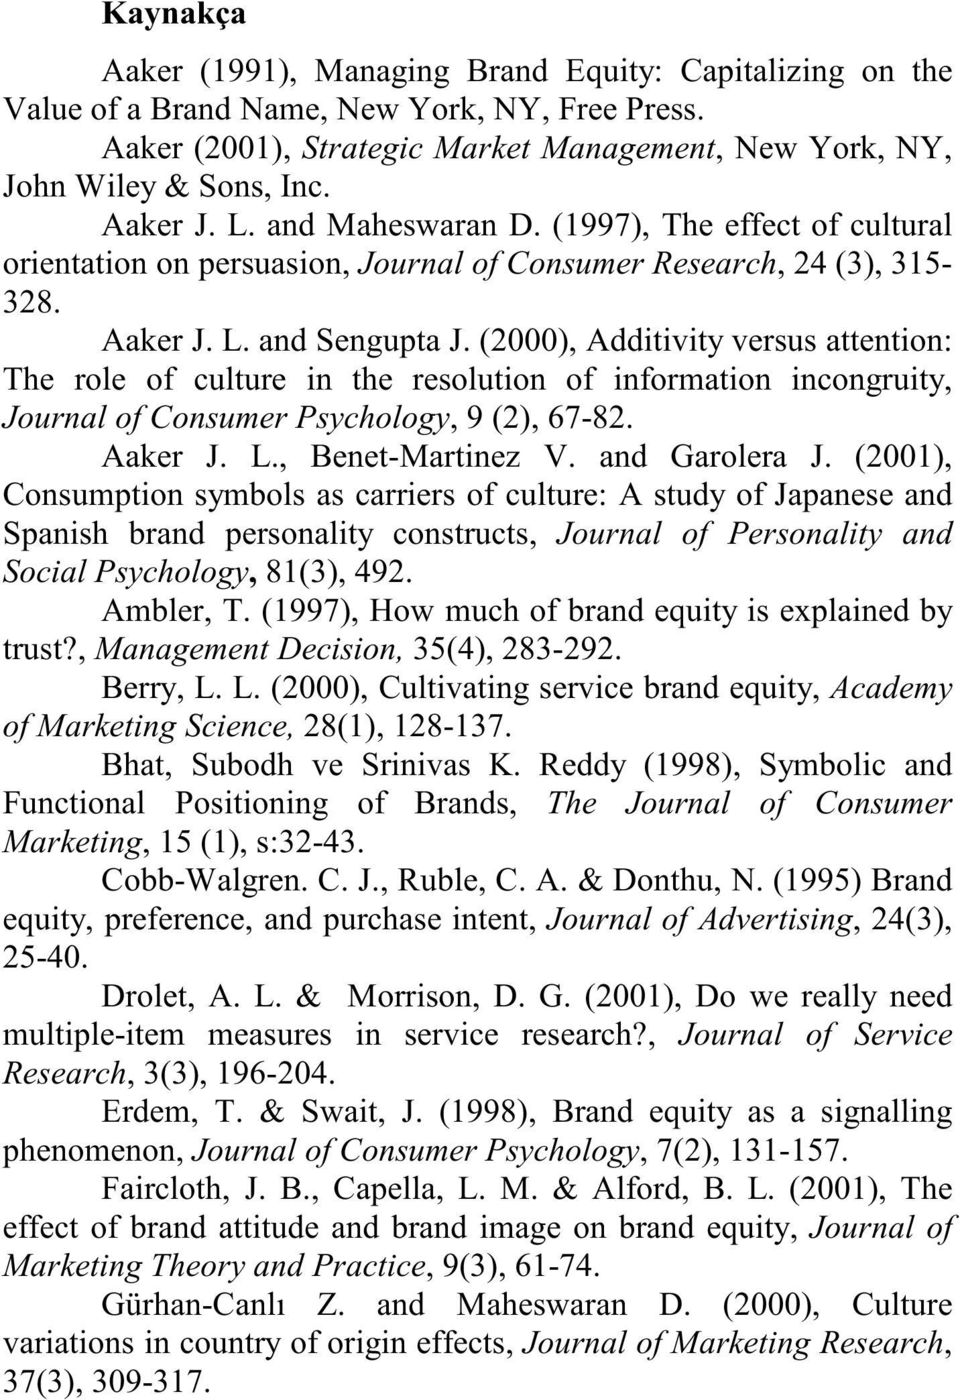 (2000), Additivity versus attention: The role of culture in the resolution of information incongruity, Journal of Consumer Psychology, 9 (2), 67-82. Aaker J. L., Benet-Martinez V. and Garolera J.